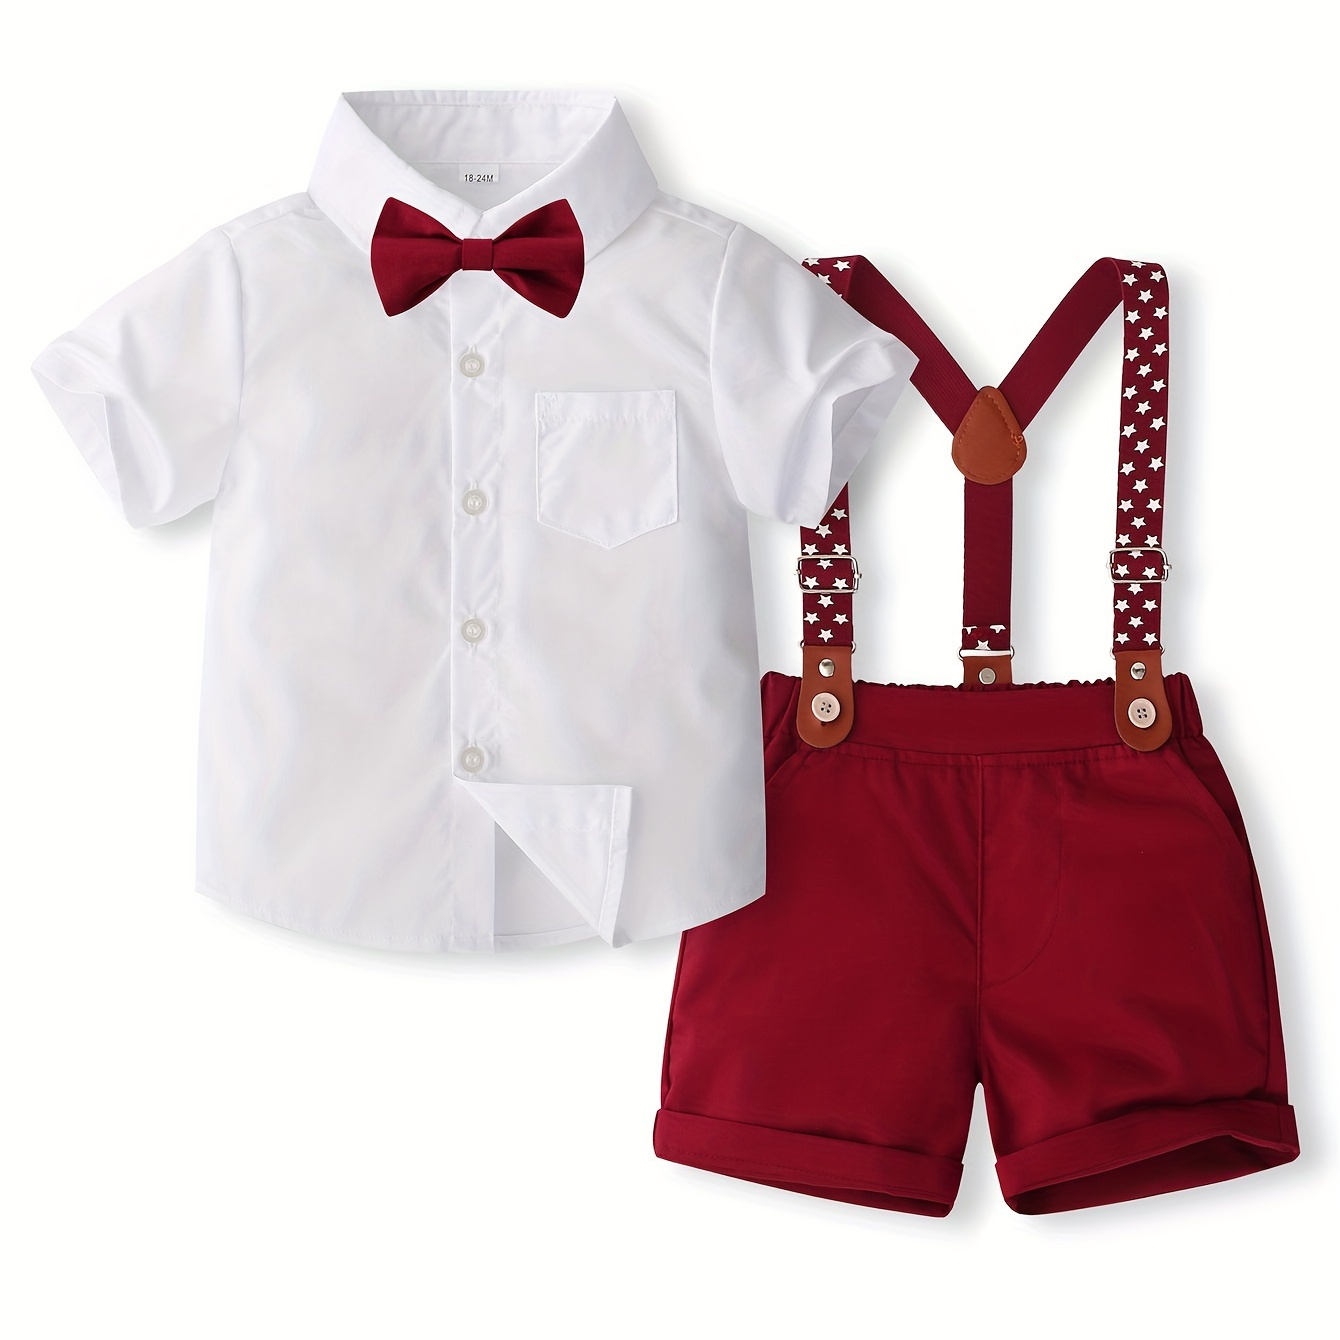 

2pcs Gentleman Outfit For Toddler Kids, Bowtie Short Sleeve Shirt & Bib Shorts Set, Formal Wear For Photography Birthday Party, Baby Boy's Clothes